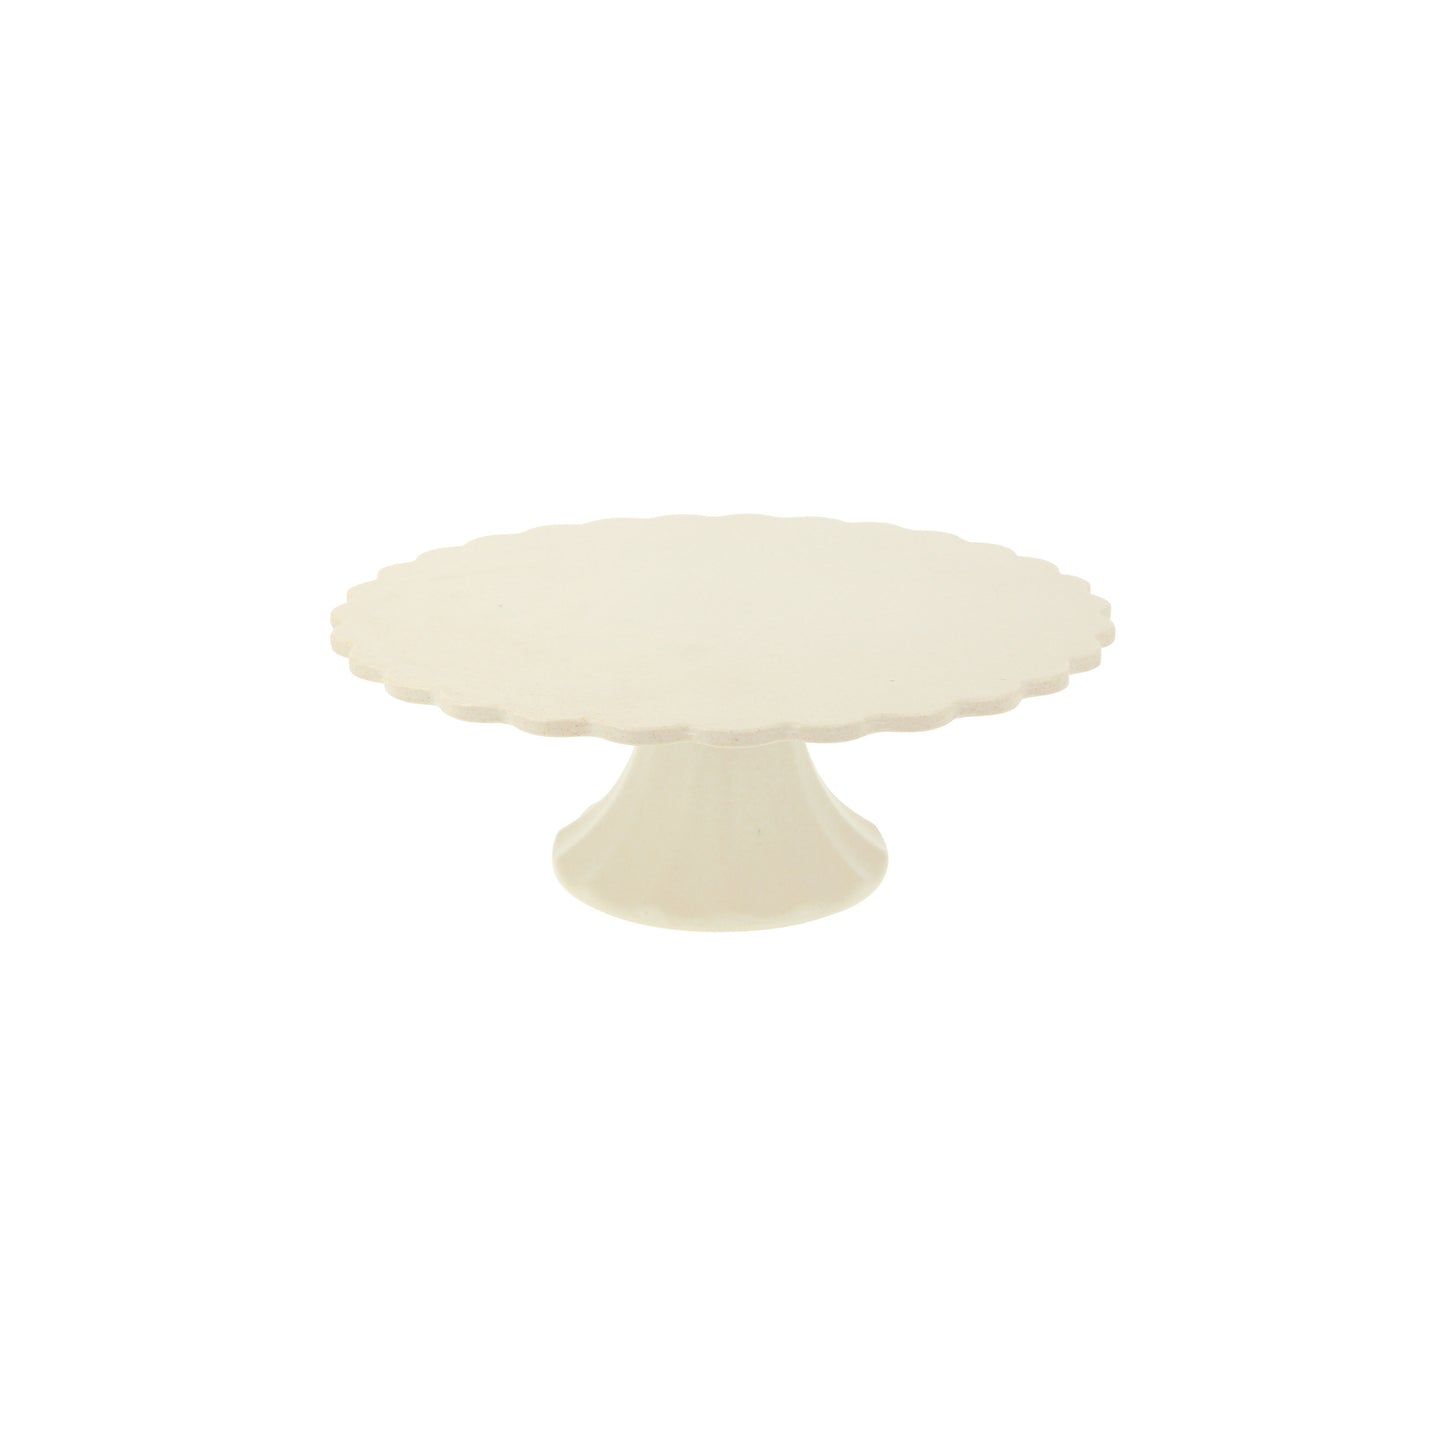 Small Cream Cake Stand - Favorite Little Things